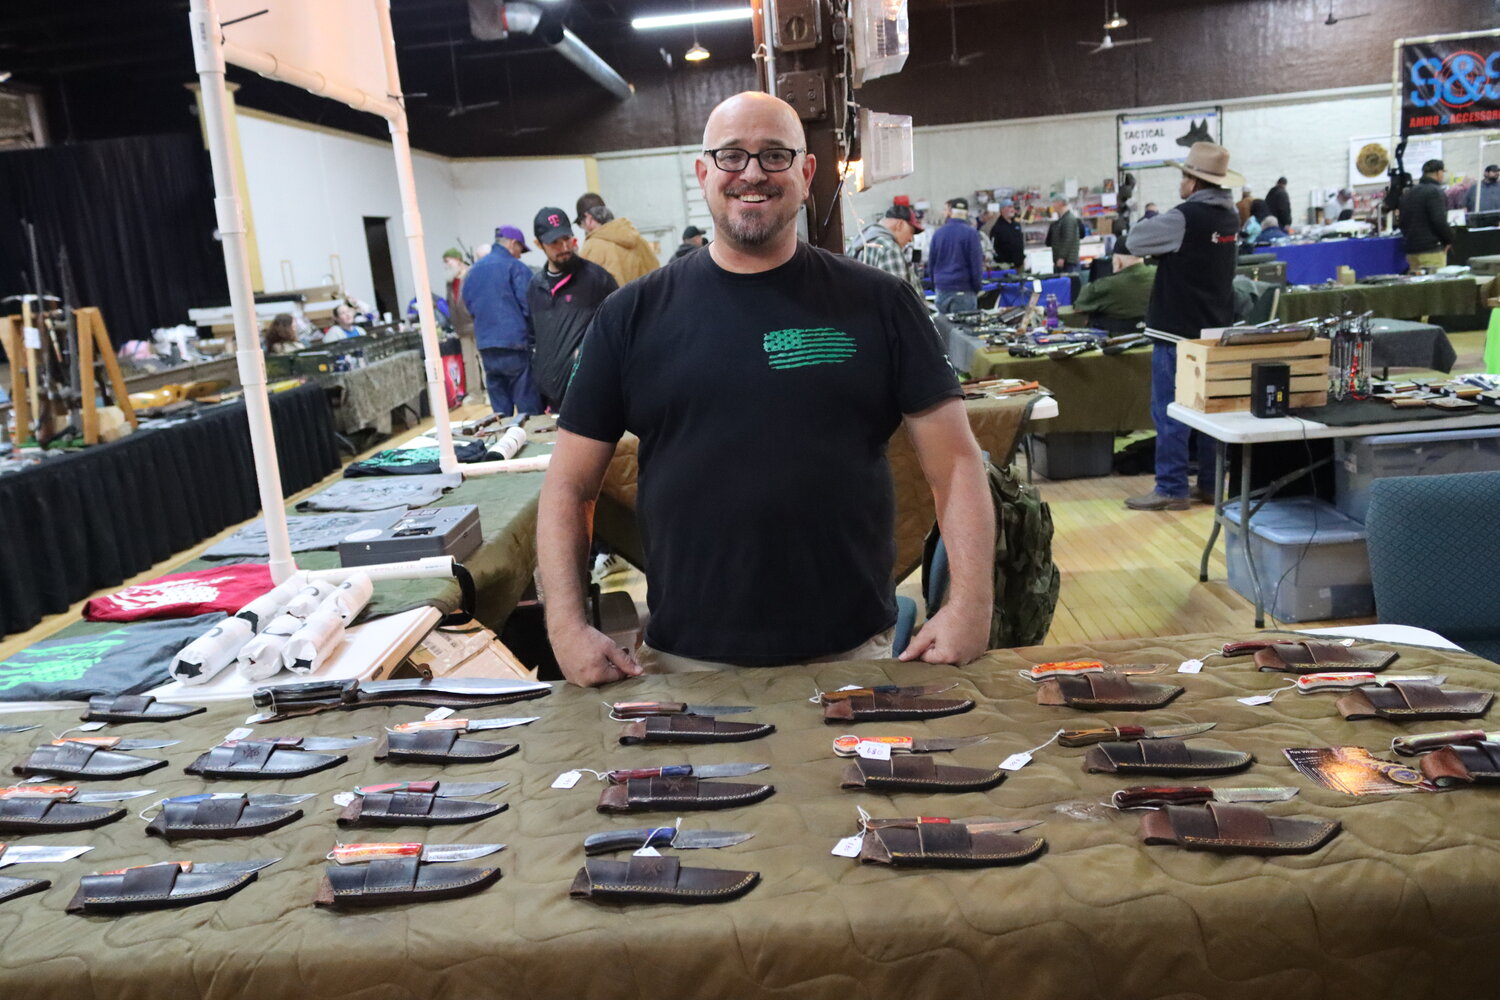 Kye White, founder of the nonprofit Veteran’s OATH selling knives and other goods to raise money for homeless veterans.